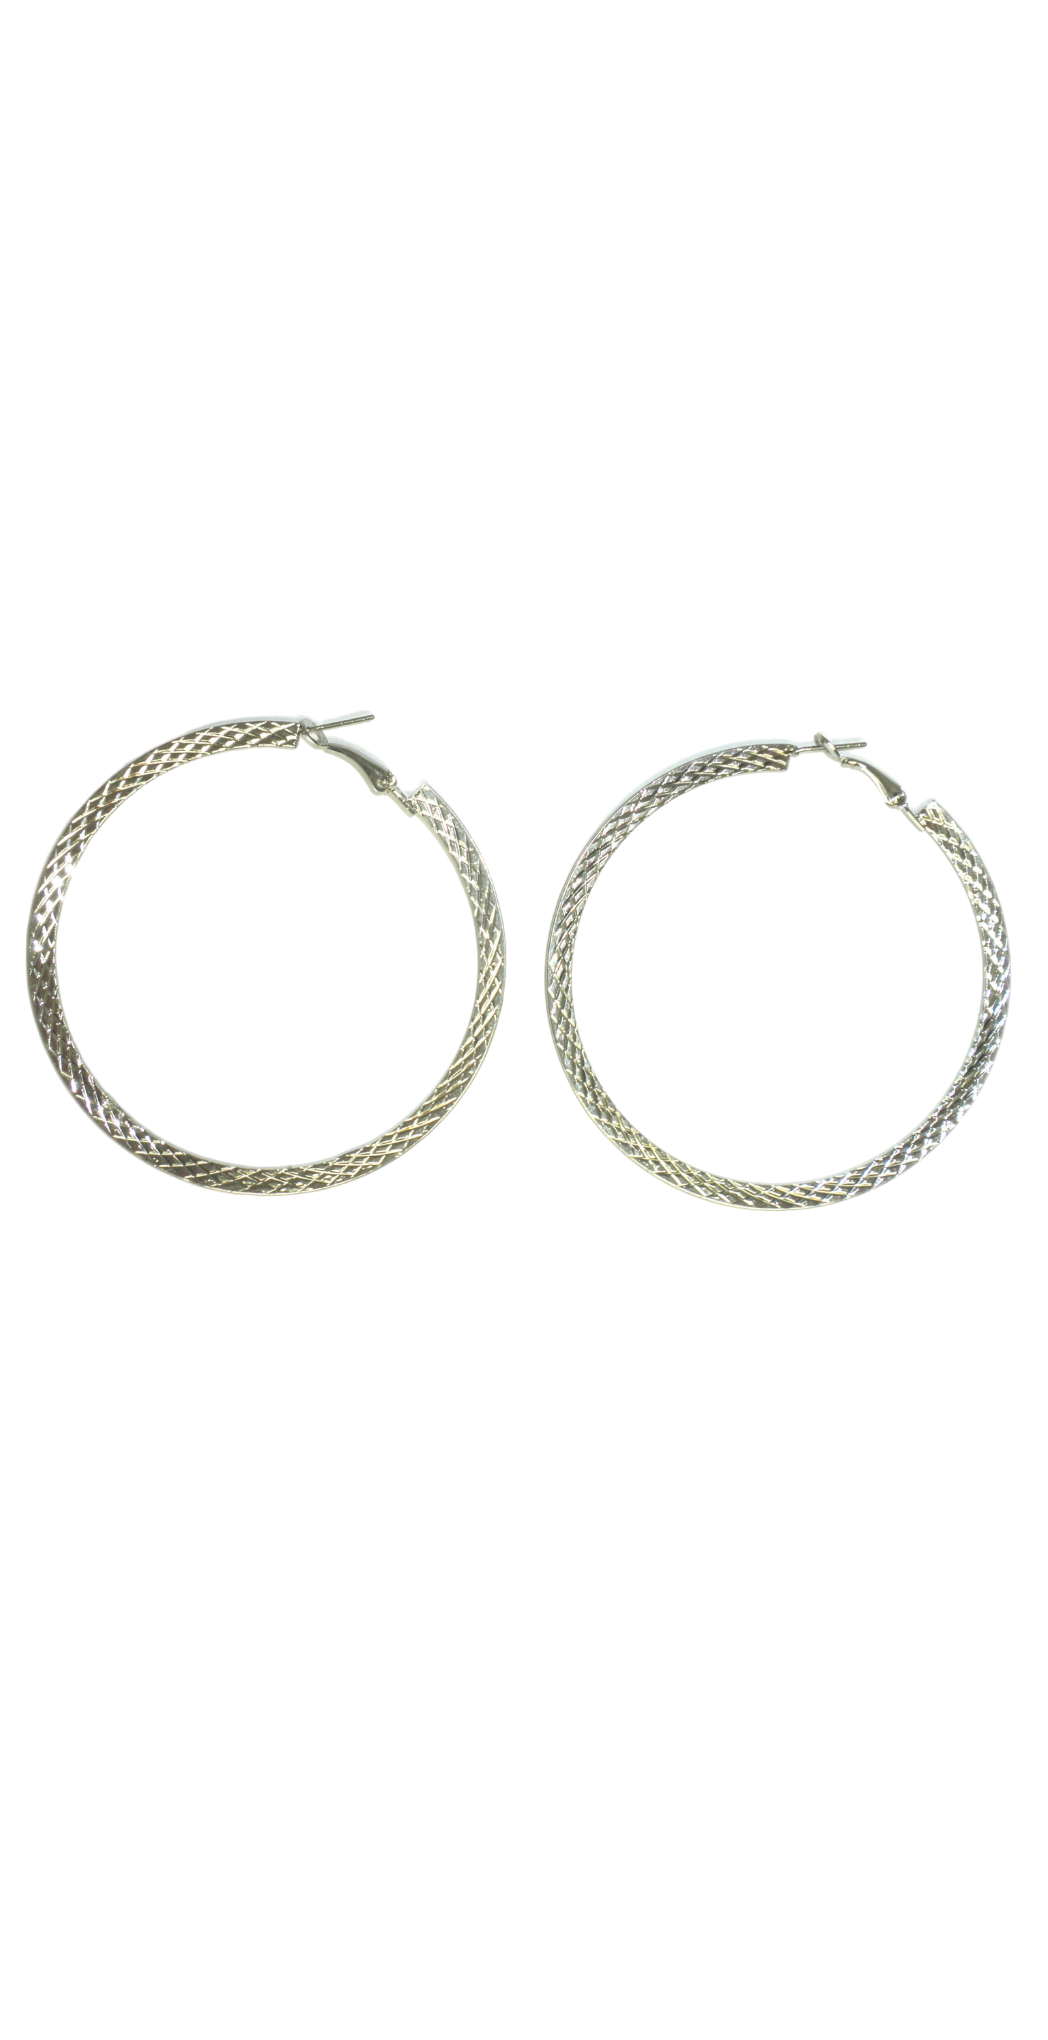 Silver Hoop Earrings With Embossed Print - The Fashion Foundation - {{ discount designer}}